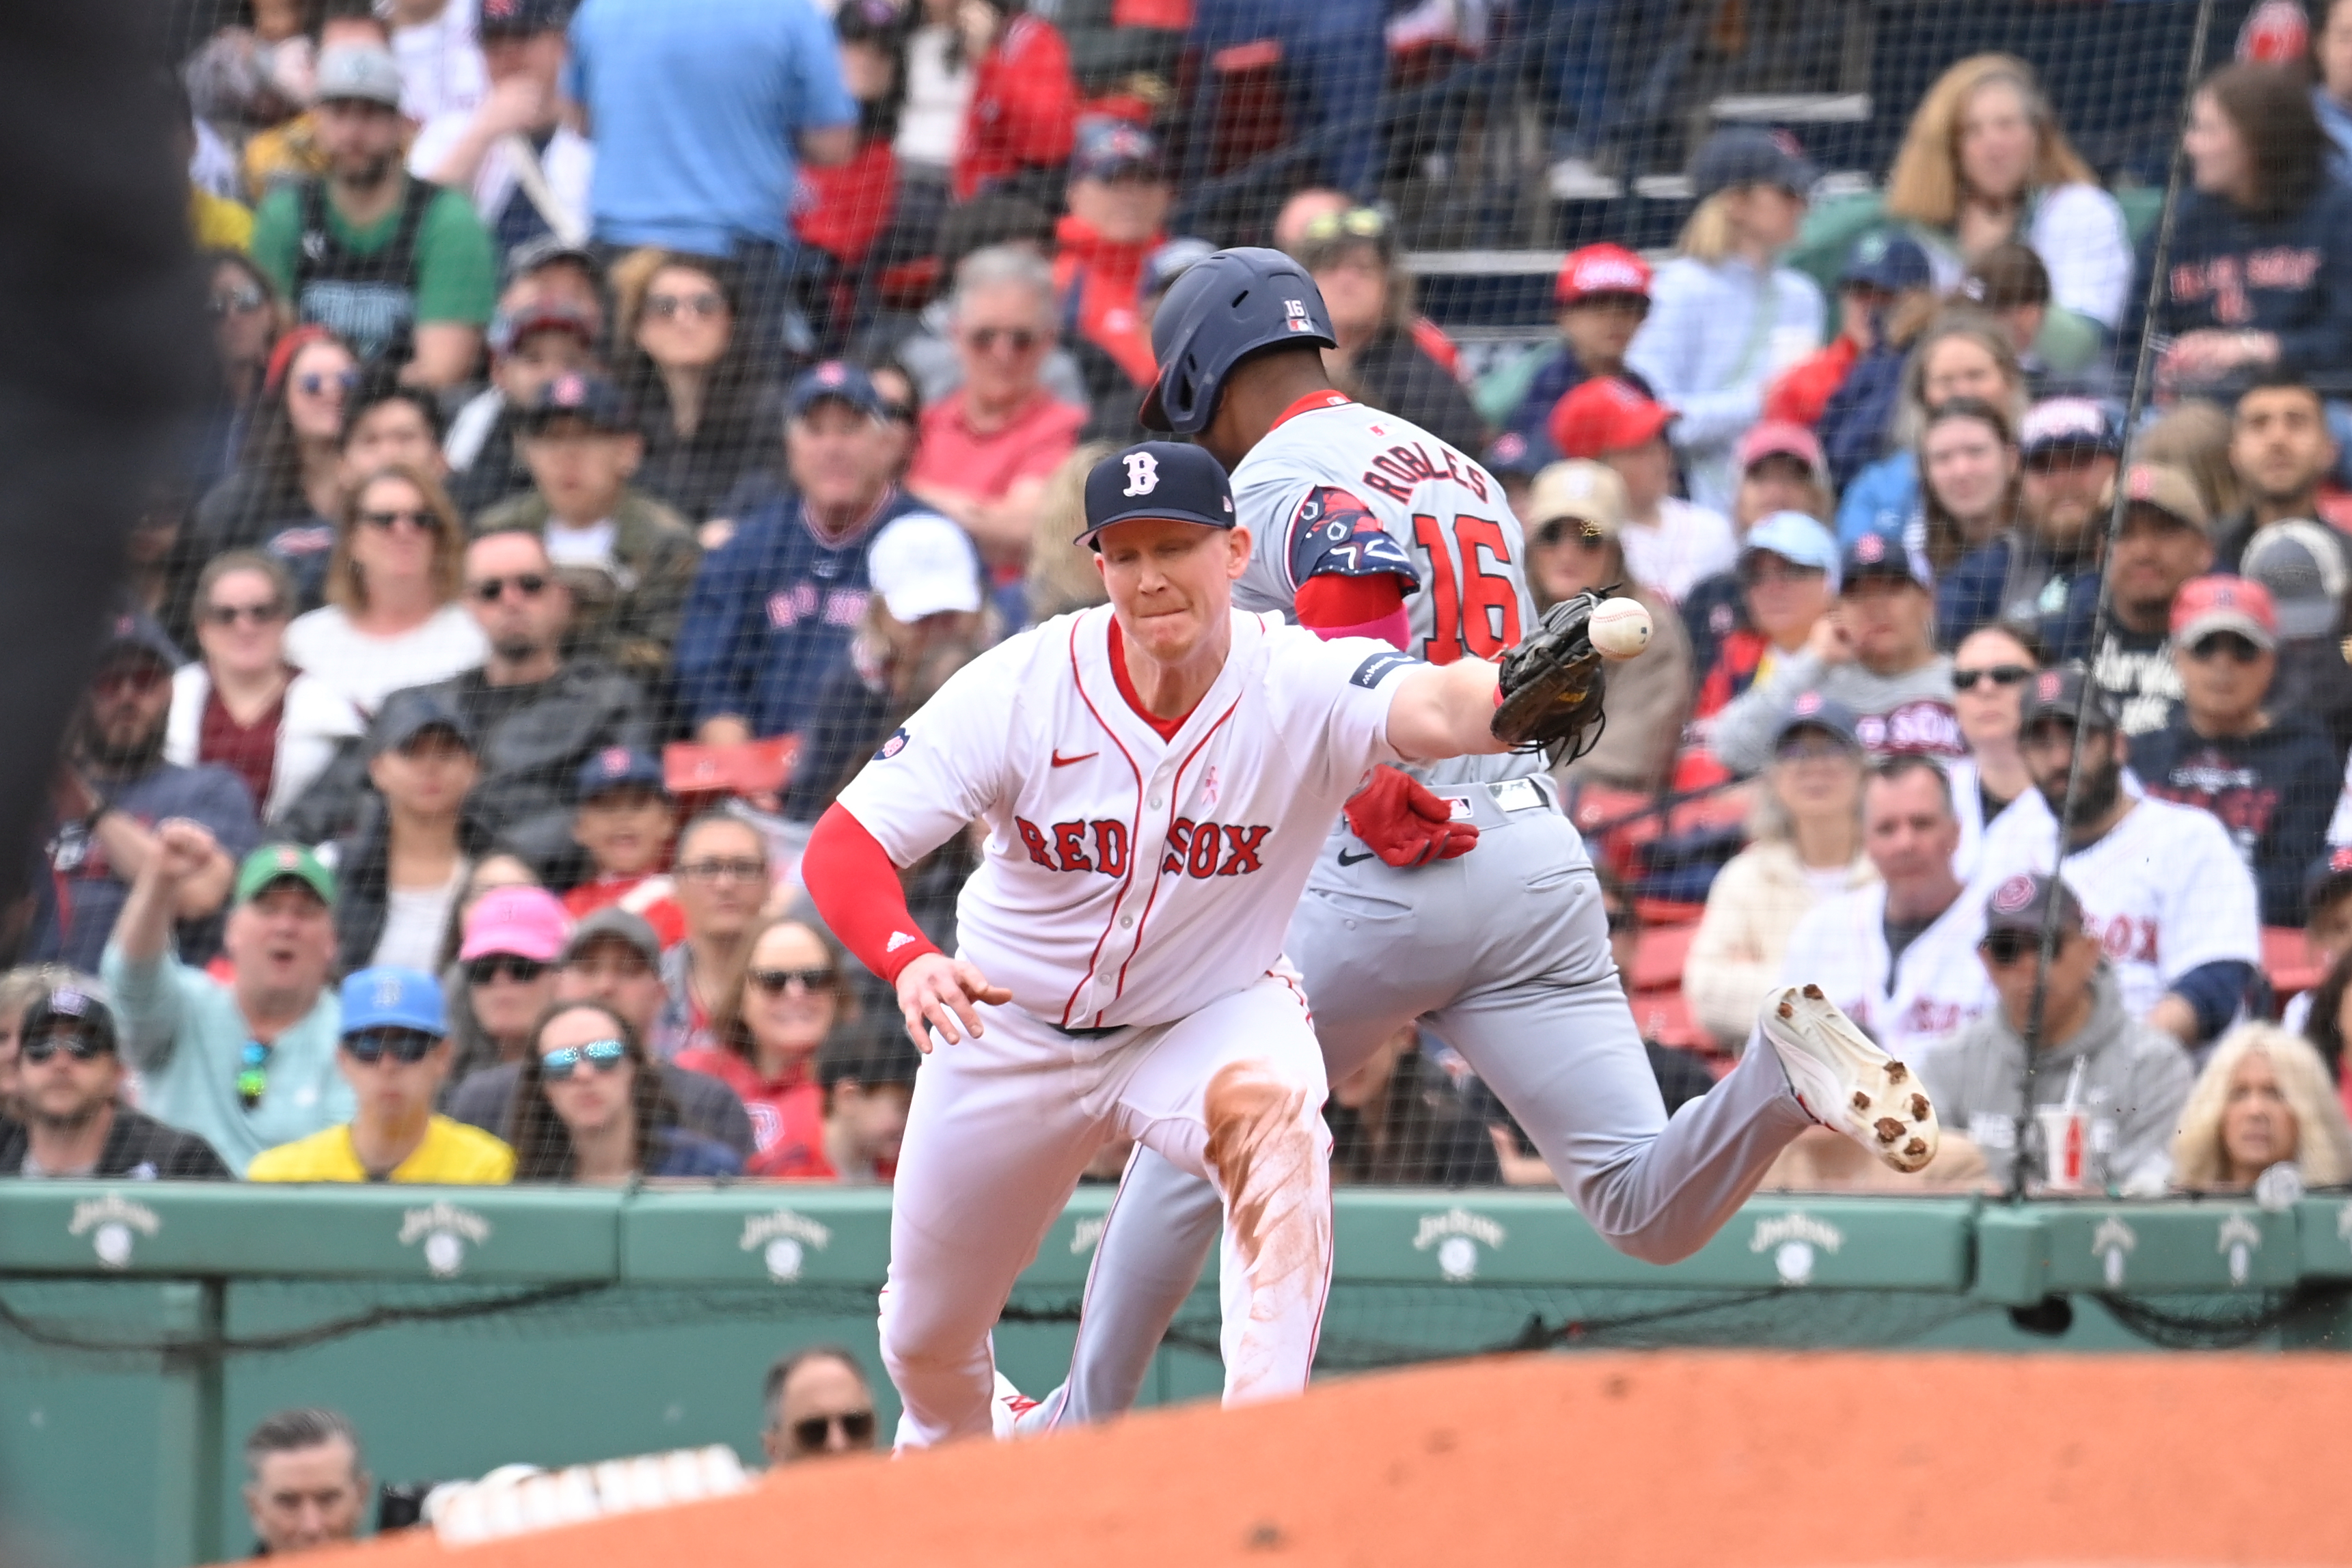 Garrett Cooper is fitting in just fine with the Red Sox